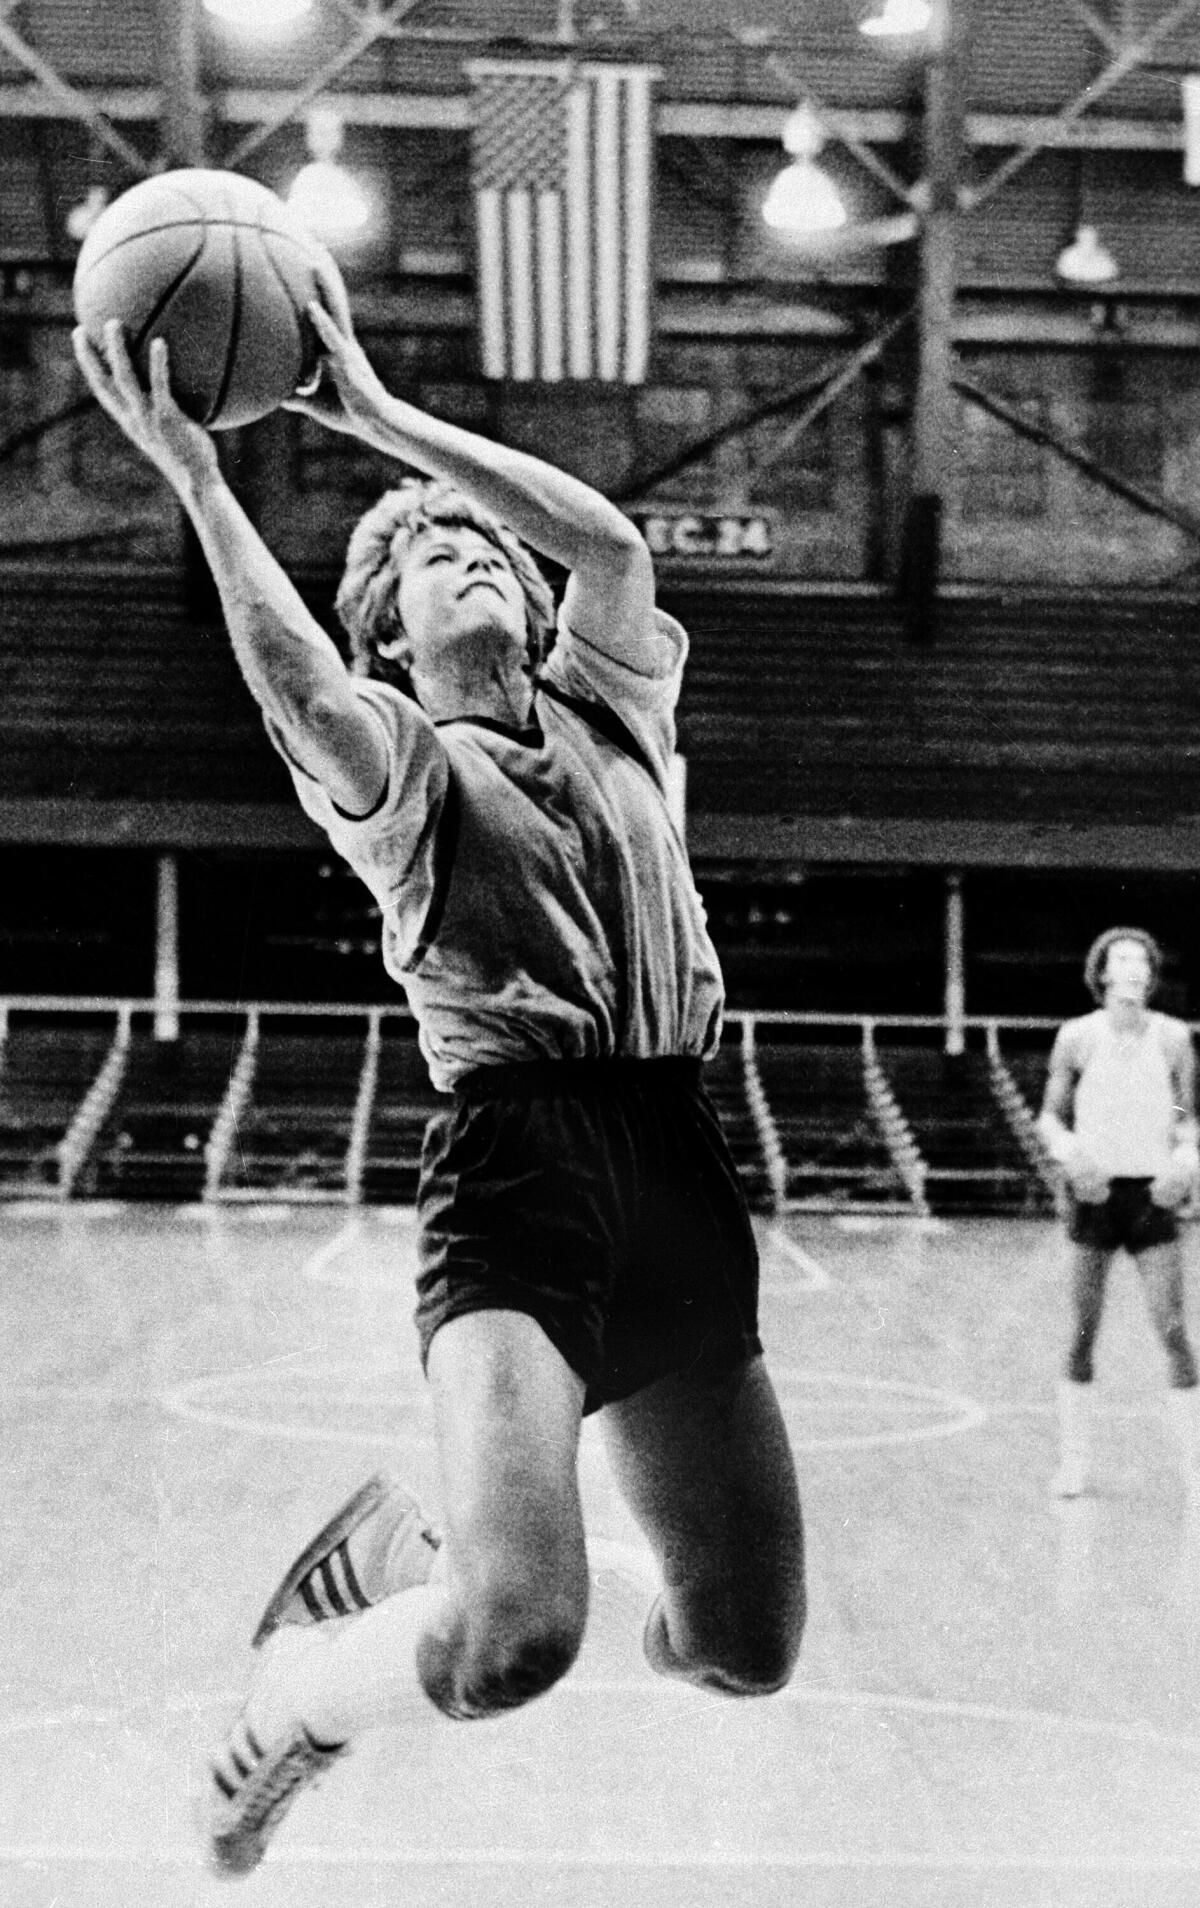 Ann Meyers drives to the basket at the NBA rookie camp for the Indiana Pacers on Sept. 10, 1978, in Indianapolis.